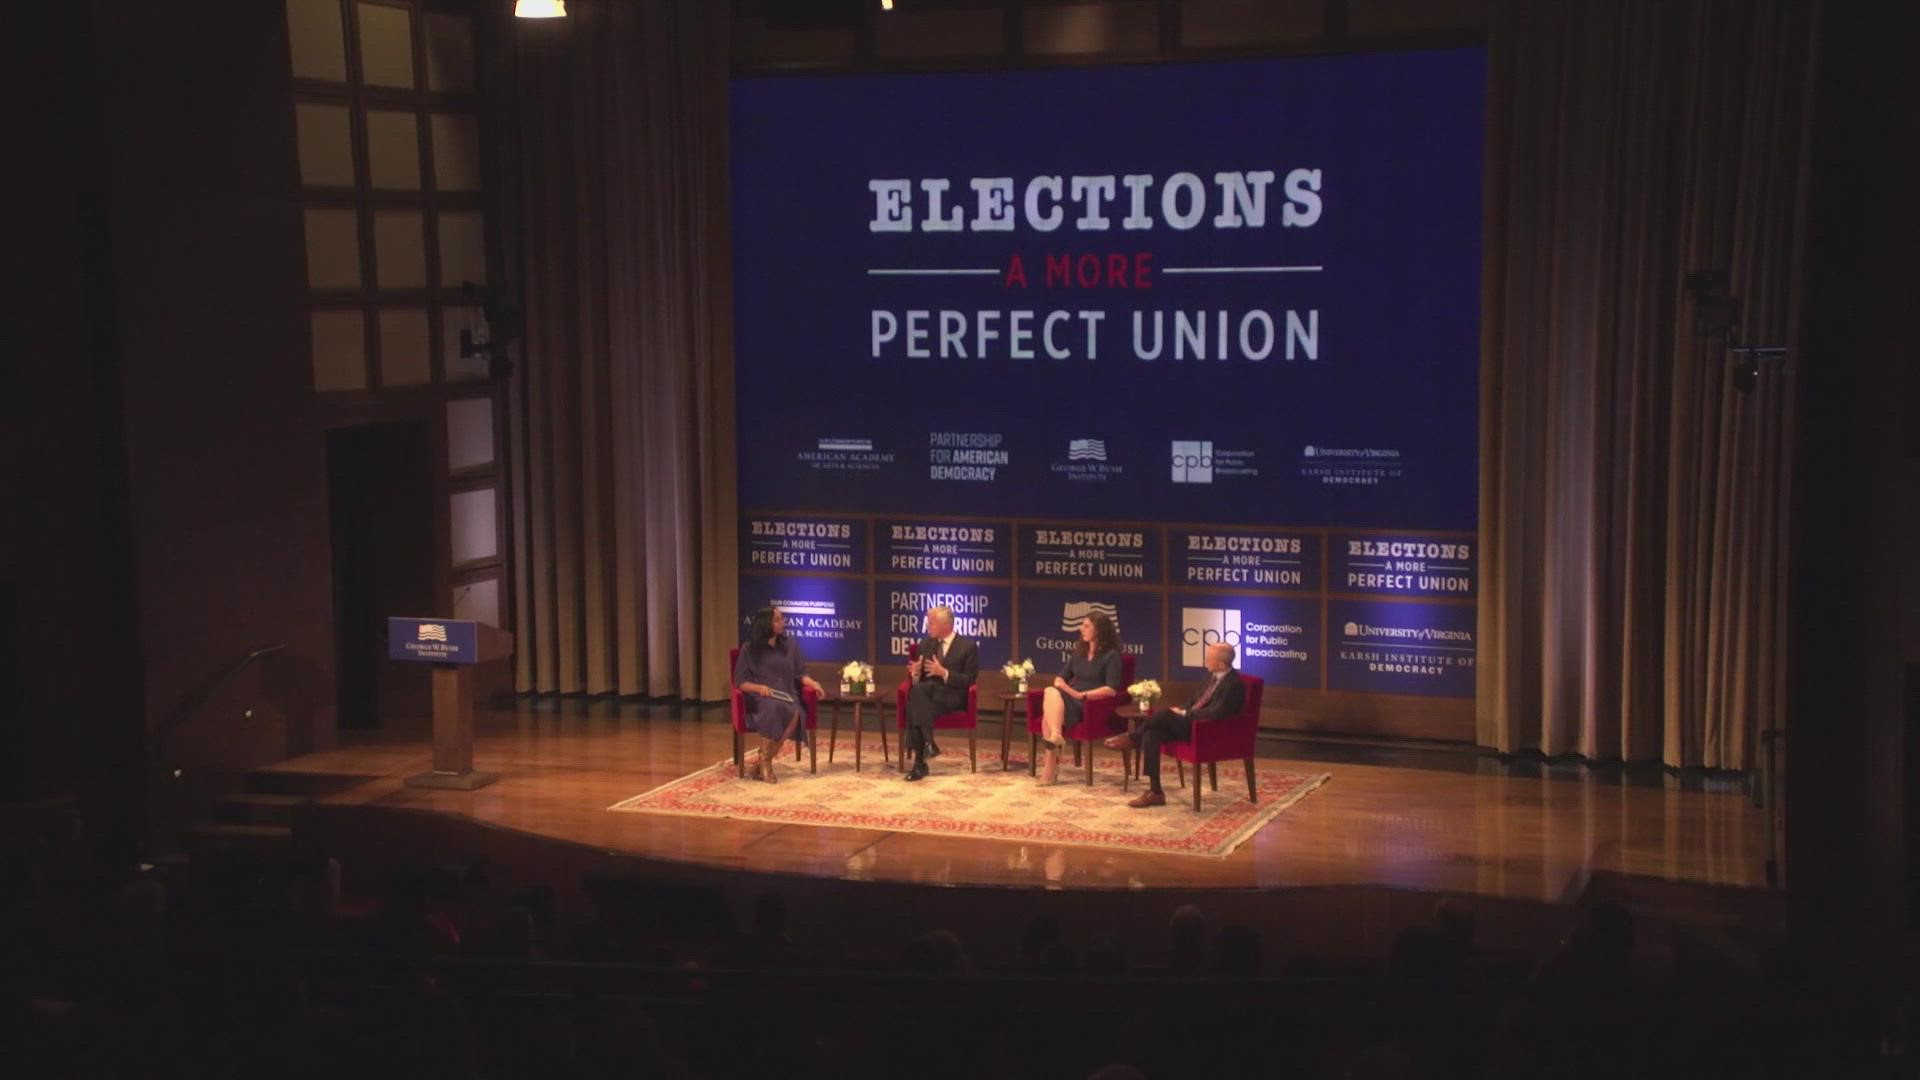 The Bush Library in Dallas hosted "Elections. A More Perfect Union." The event was attended by former President George W. Bush.